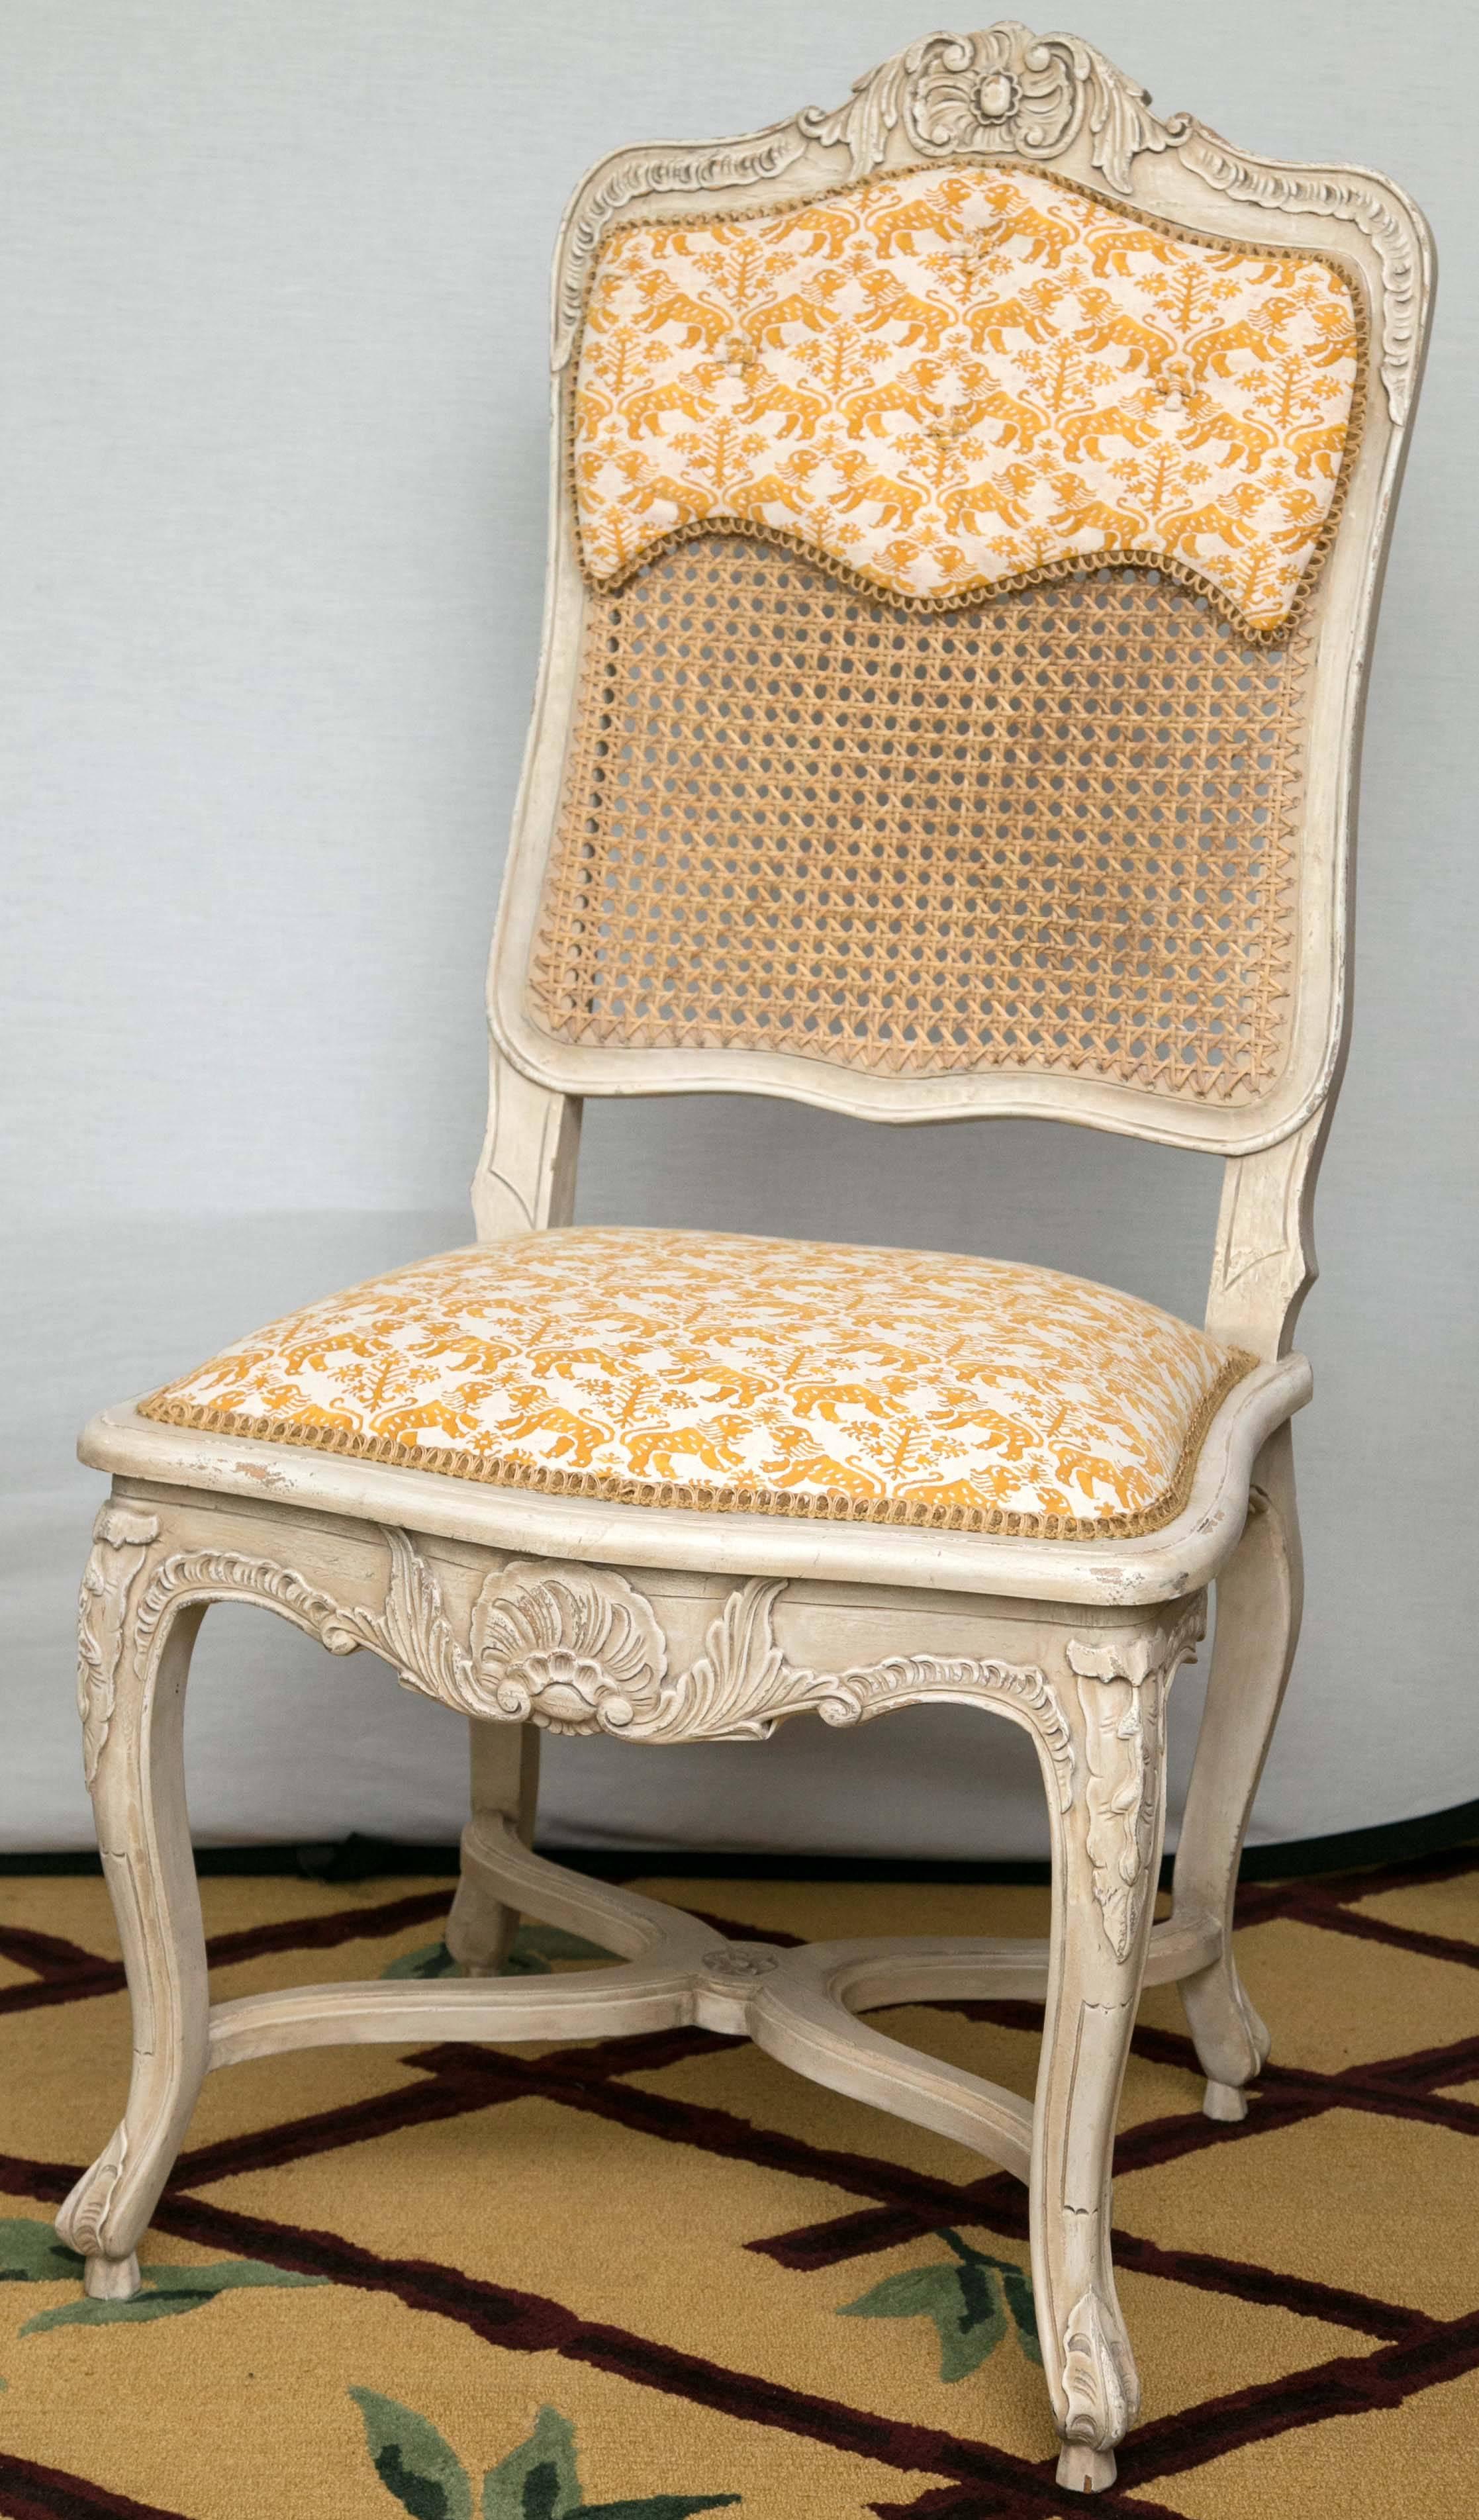 Set of 12 Maison Jansen Style Cote, France, Fortuny fabric, Regency style chairs. Hand-carved, exquisite fabric. A Buttercup Yellow Fabric with Dragons in White Adorn the Seats and a .25 of the Seat Backs - The Seat Backs are Caned - white and the